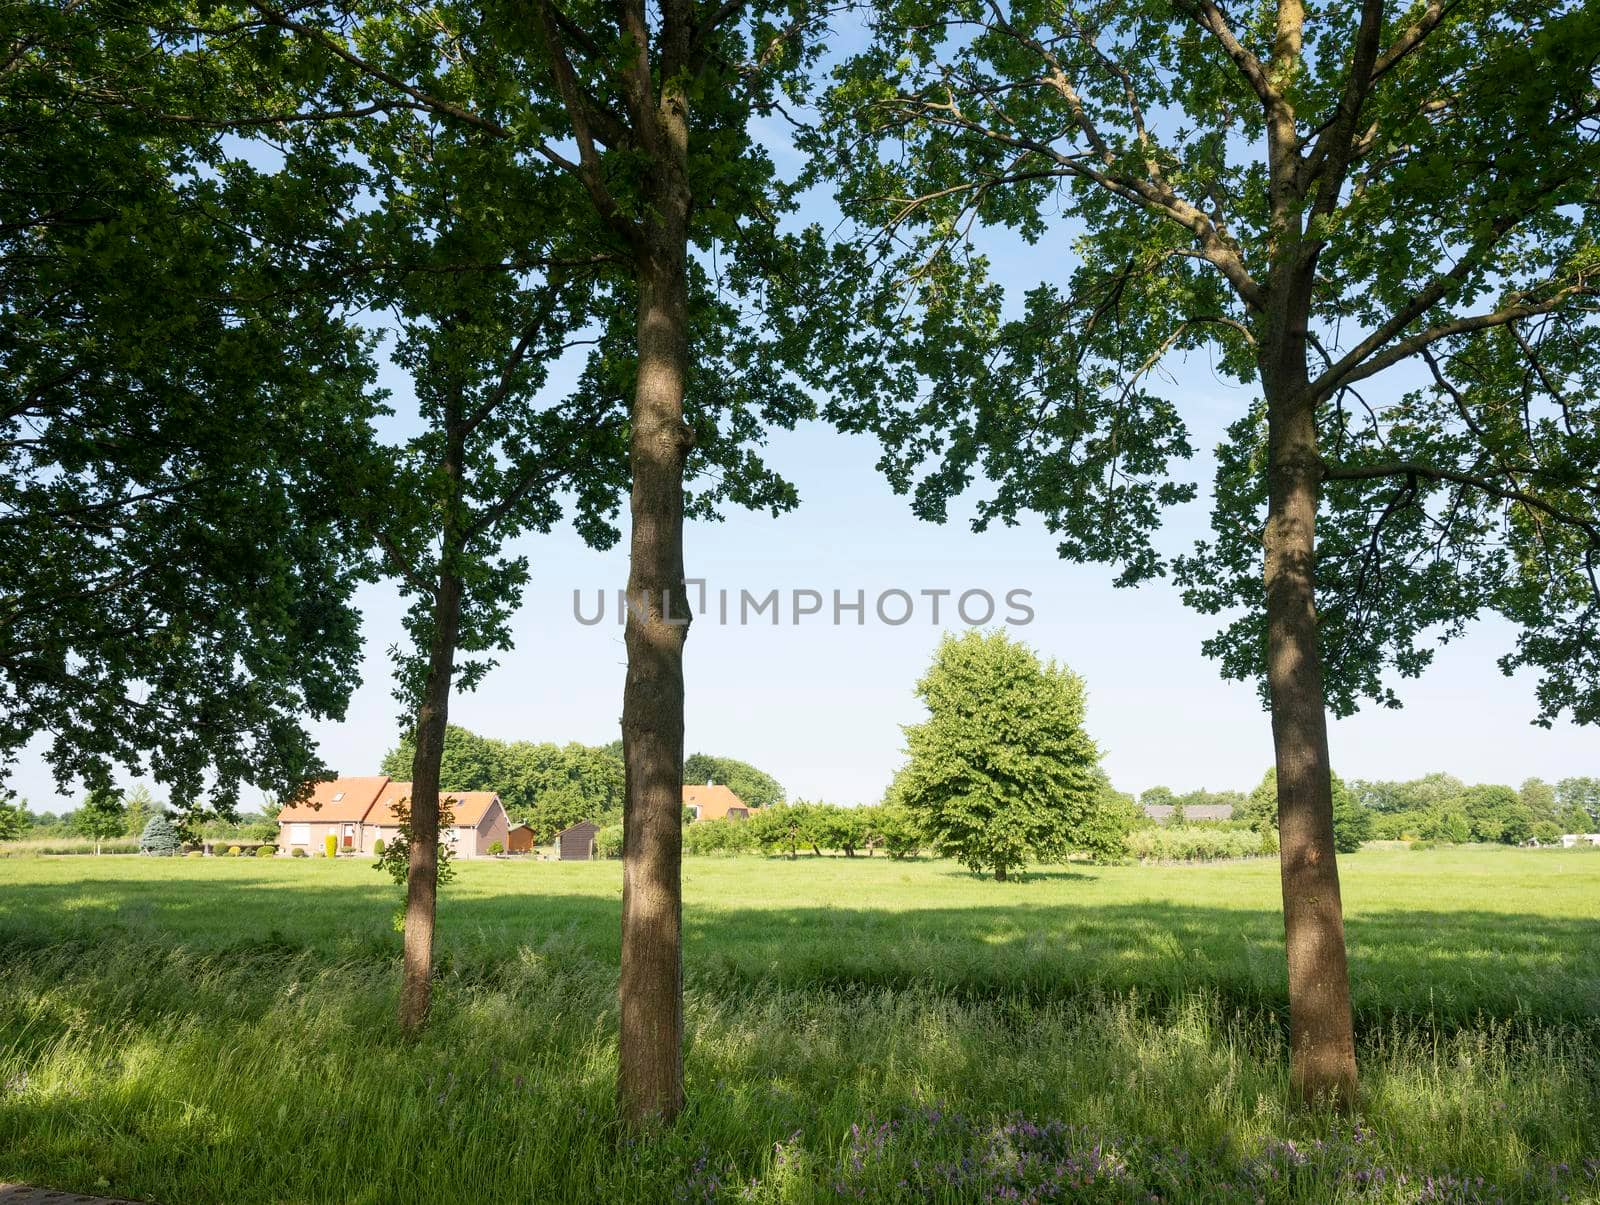 green grassy fields with houses and trees between arnhem and nijmegen in the netherlands under blue sky by ahavelaar